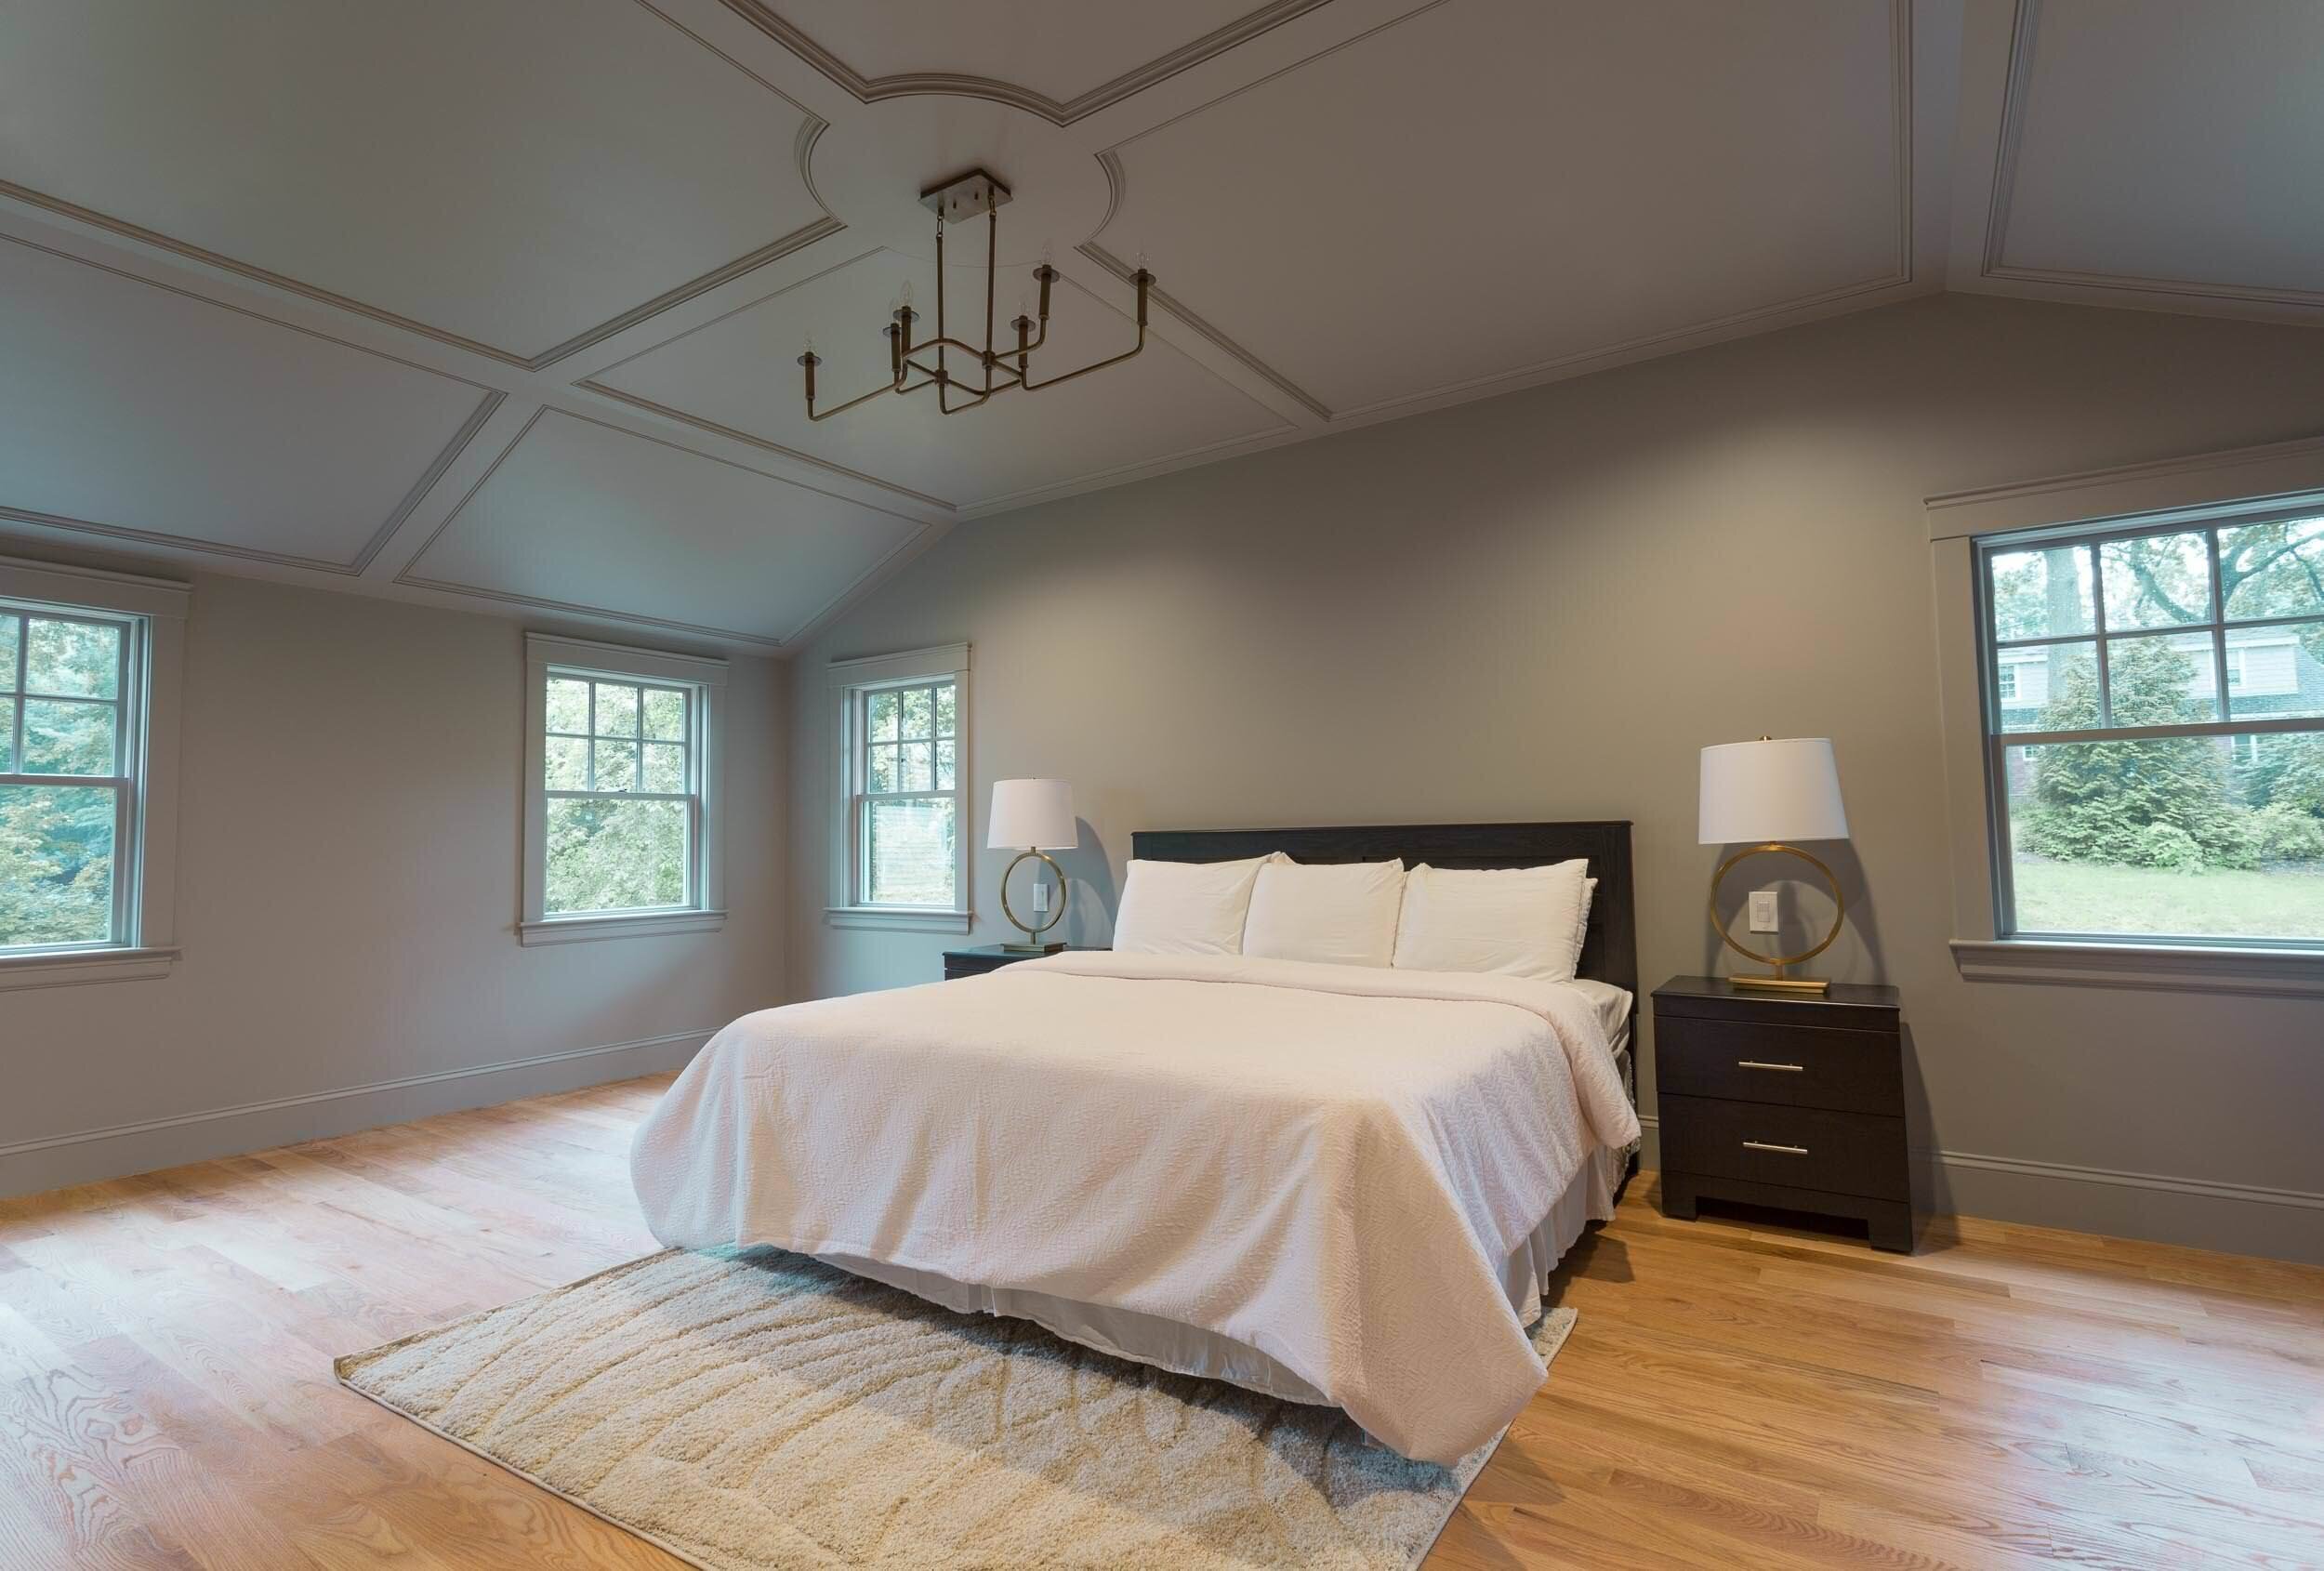 5 Ways To Paint Your Ceiling In 2020, Should I Paint The Ceiling White Or Wall Color